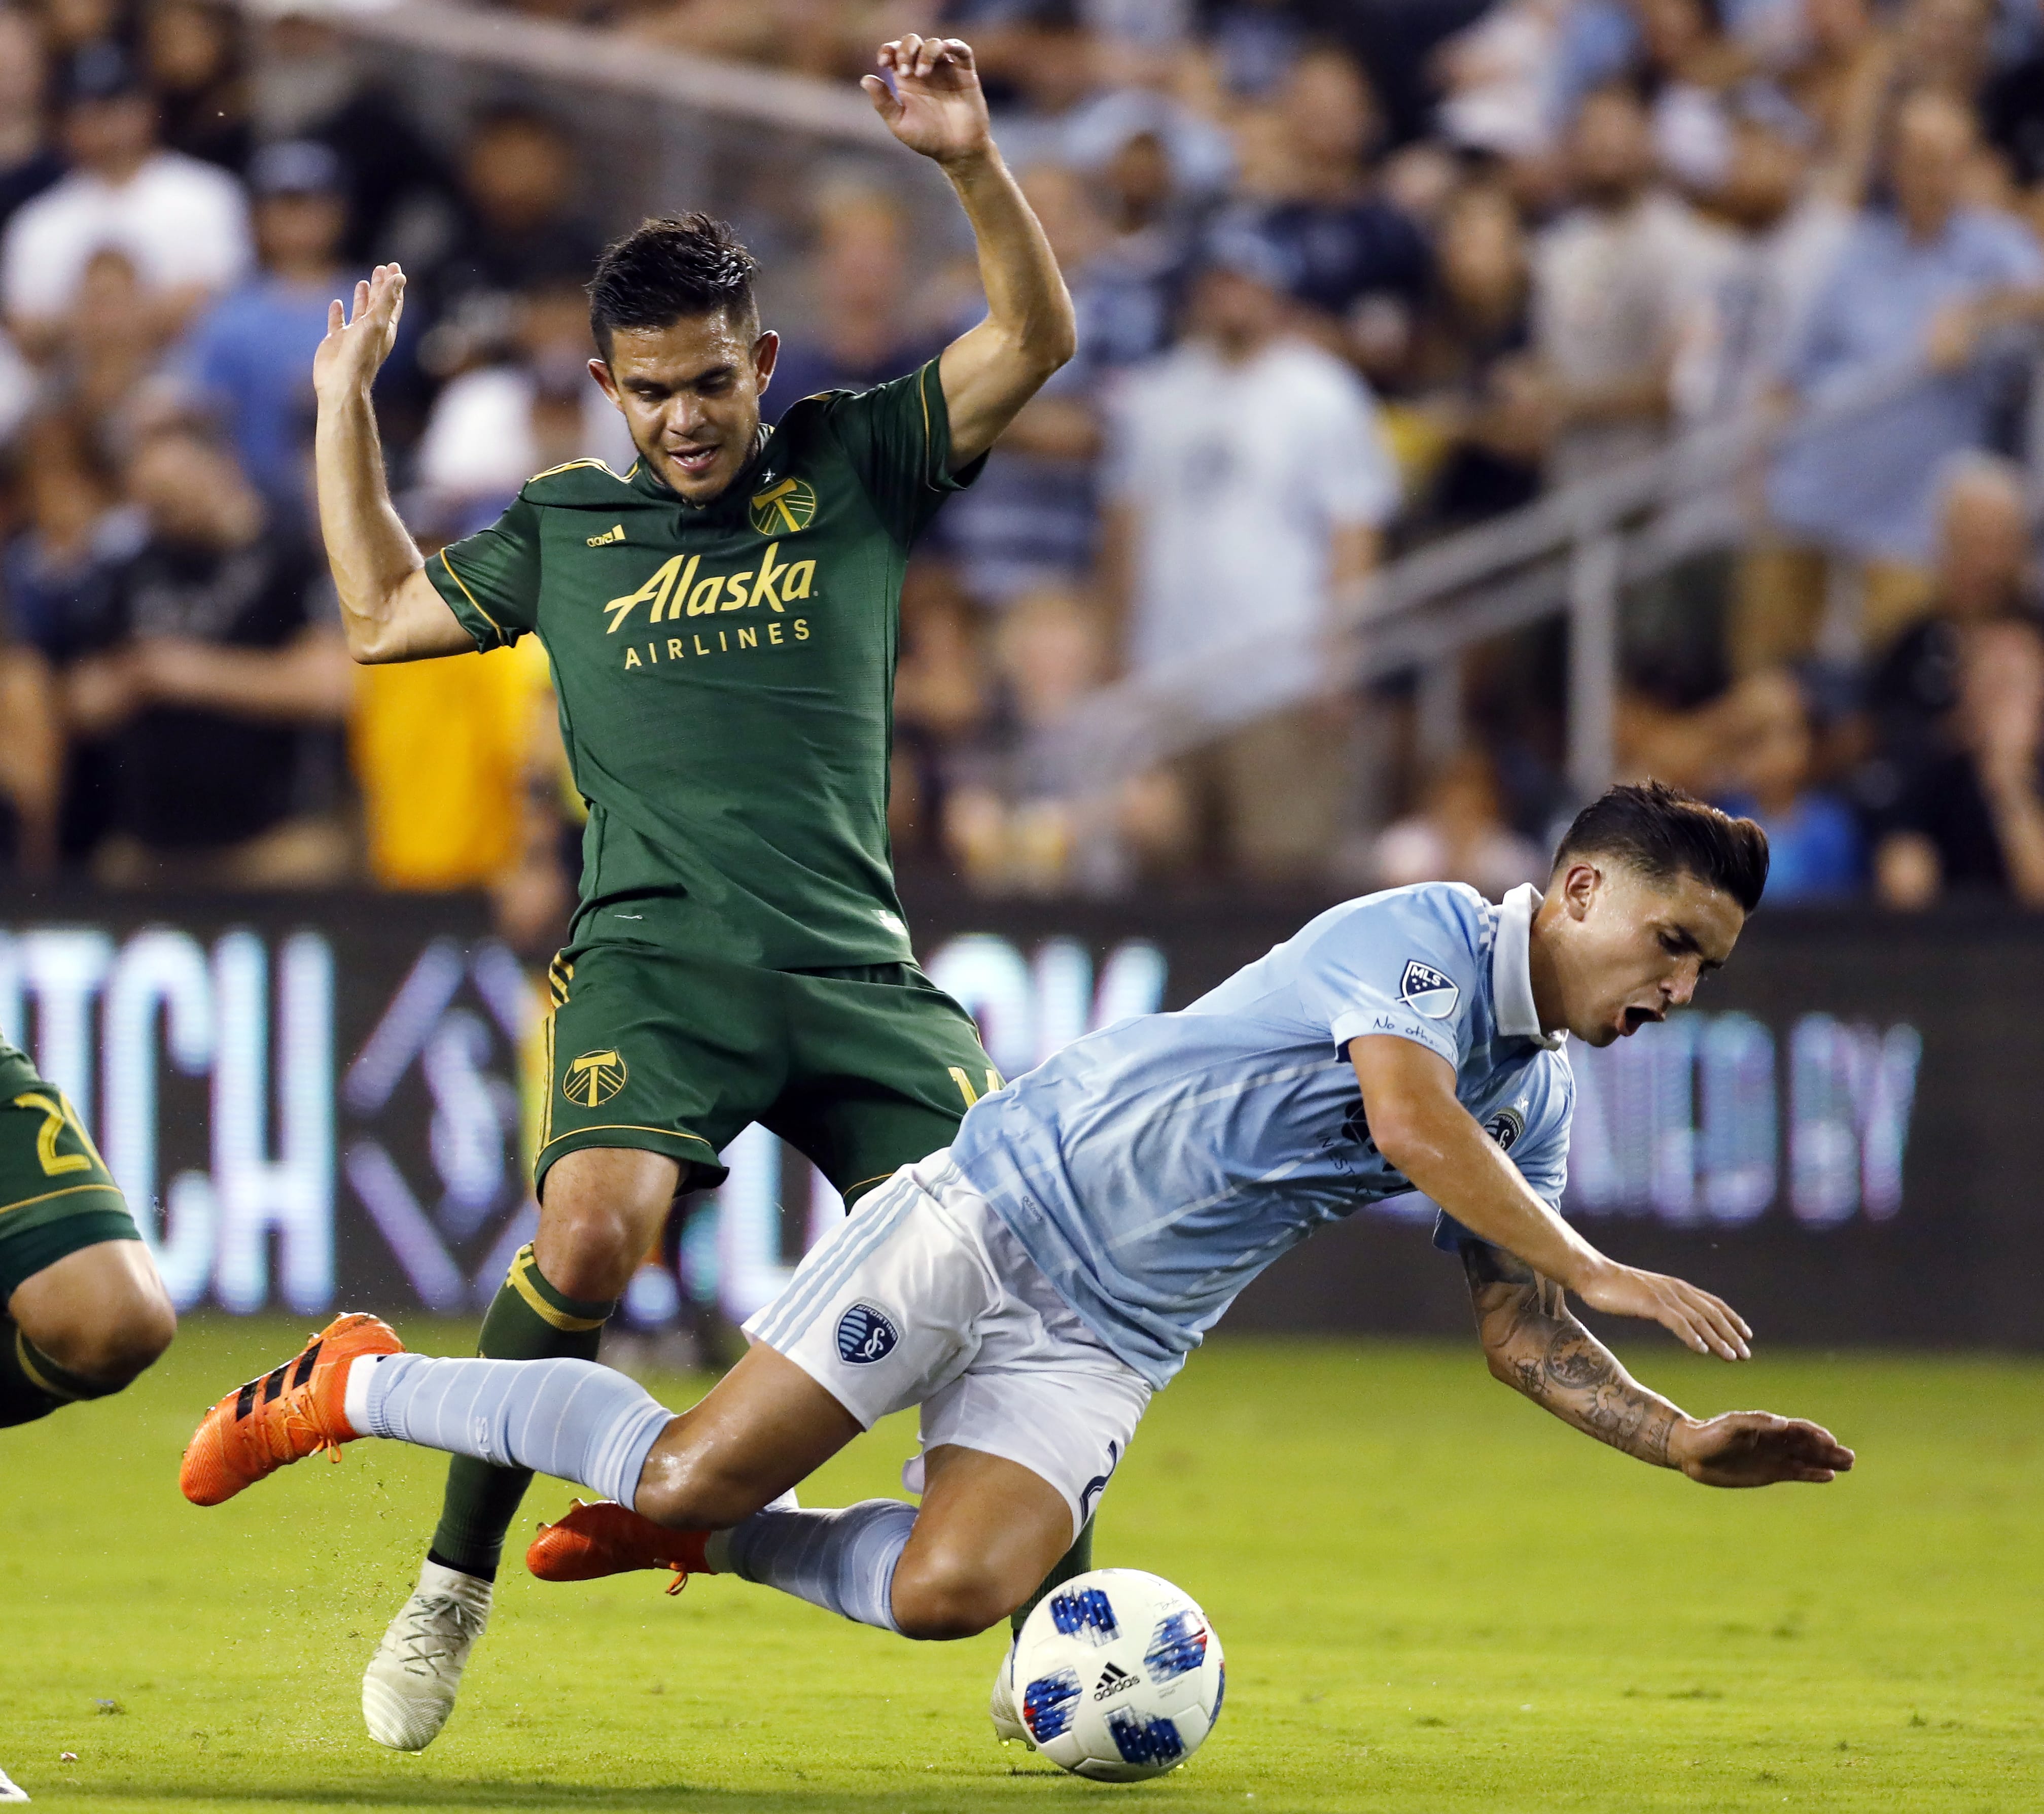 Sporting Kansas City midfielder Felipe Gutierrez, right, is tripped by Portland Timbers midfielder Andres Flores, left, during the second half of an MLS soccer match in Kansas City, Kan., Saturday, Aug. 18, 2018. (AP Photo/Colin E.